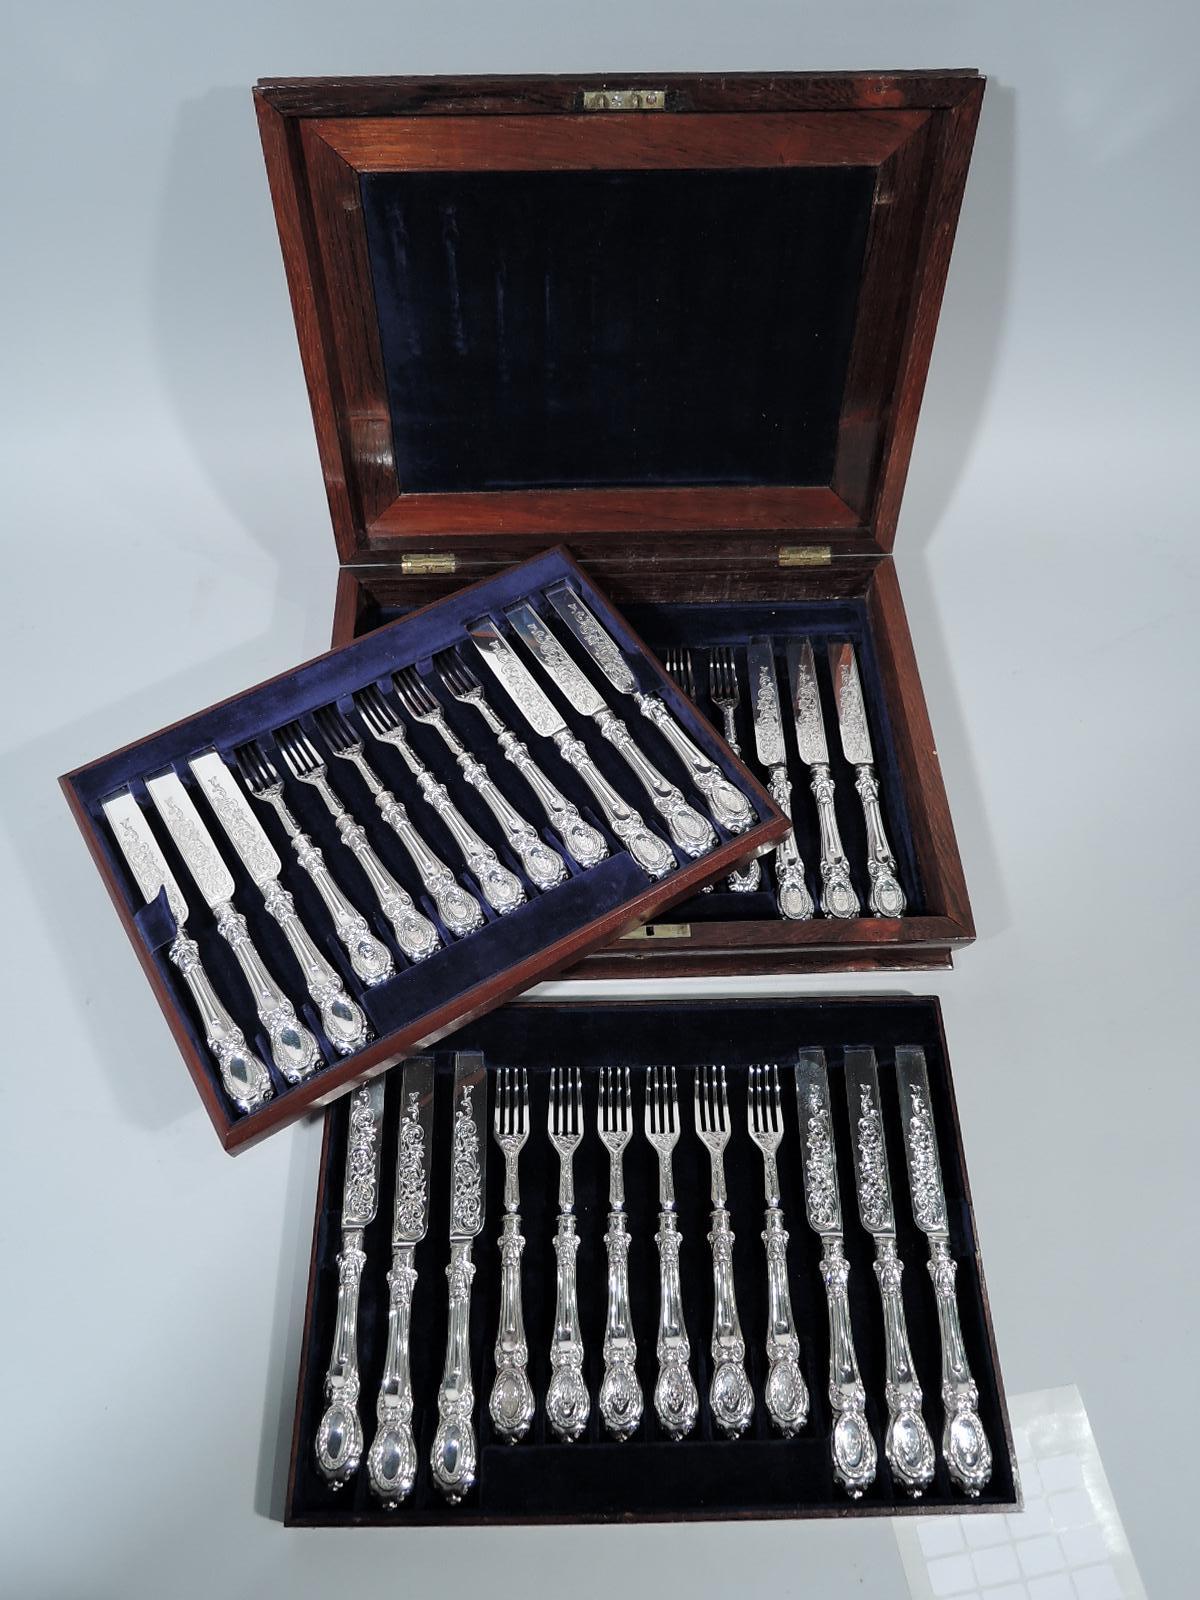 Victorian Rococo sterling silver dessert set. Made by Martin, Hall & Co., Ltd in Sheffield in 1859. This set comprises 18 knives and 18 forks. Textural handle with strapwork cartouche; terminal scrolled with engraved armorial in cabled oval. Blades